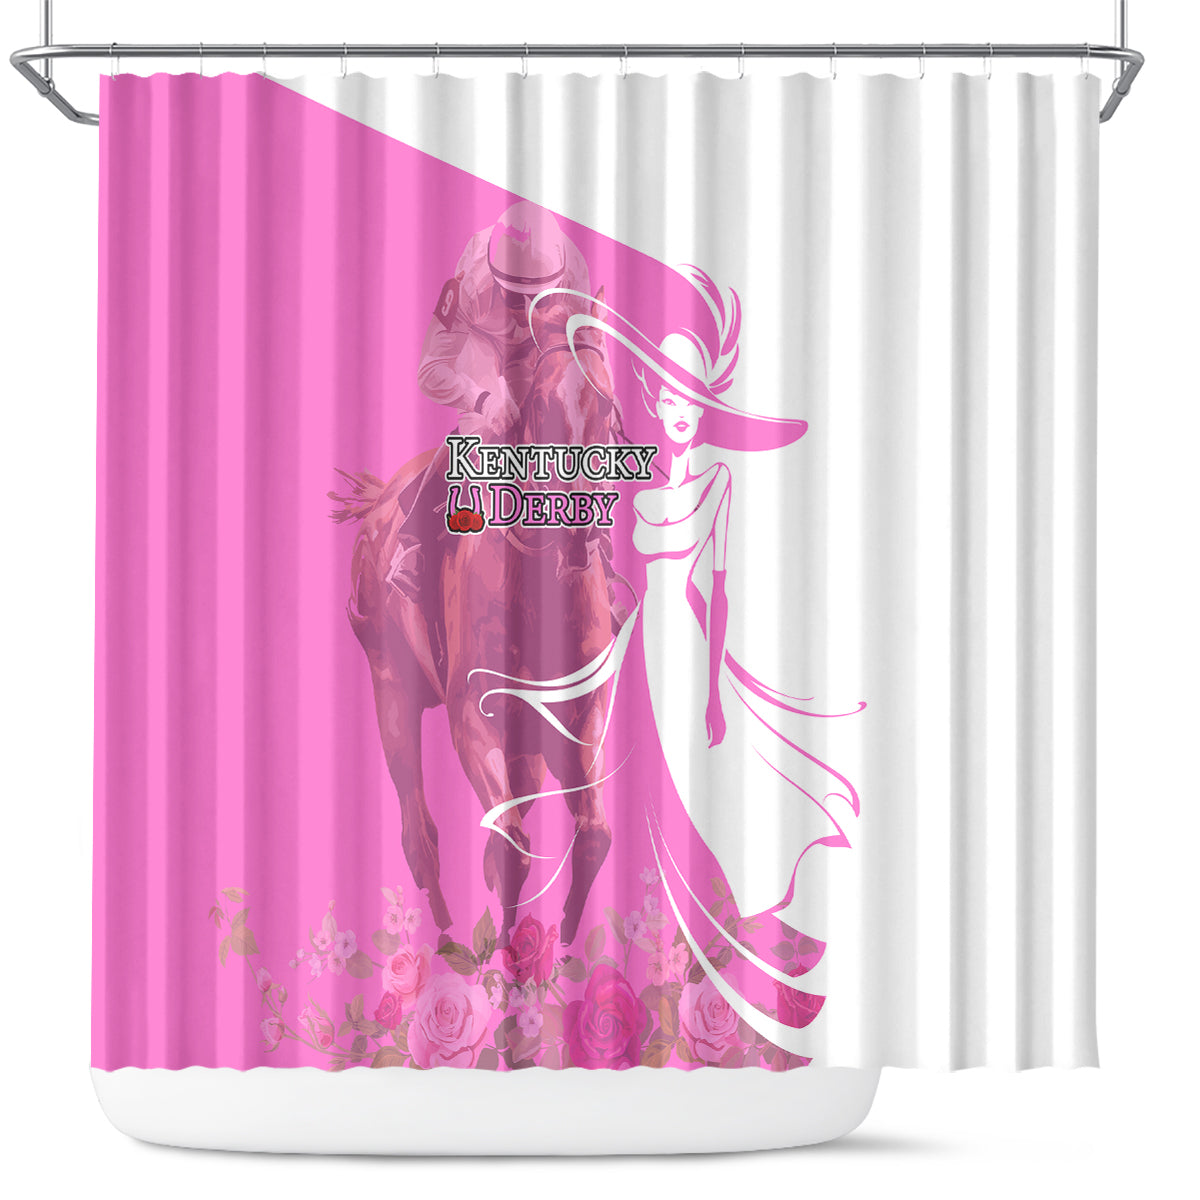 Kentucky Racing Horses Derby Hat Girl Shower Curtain Pink Color